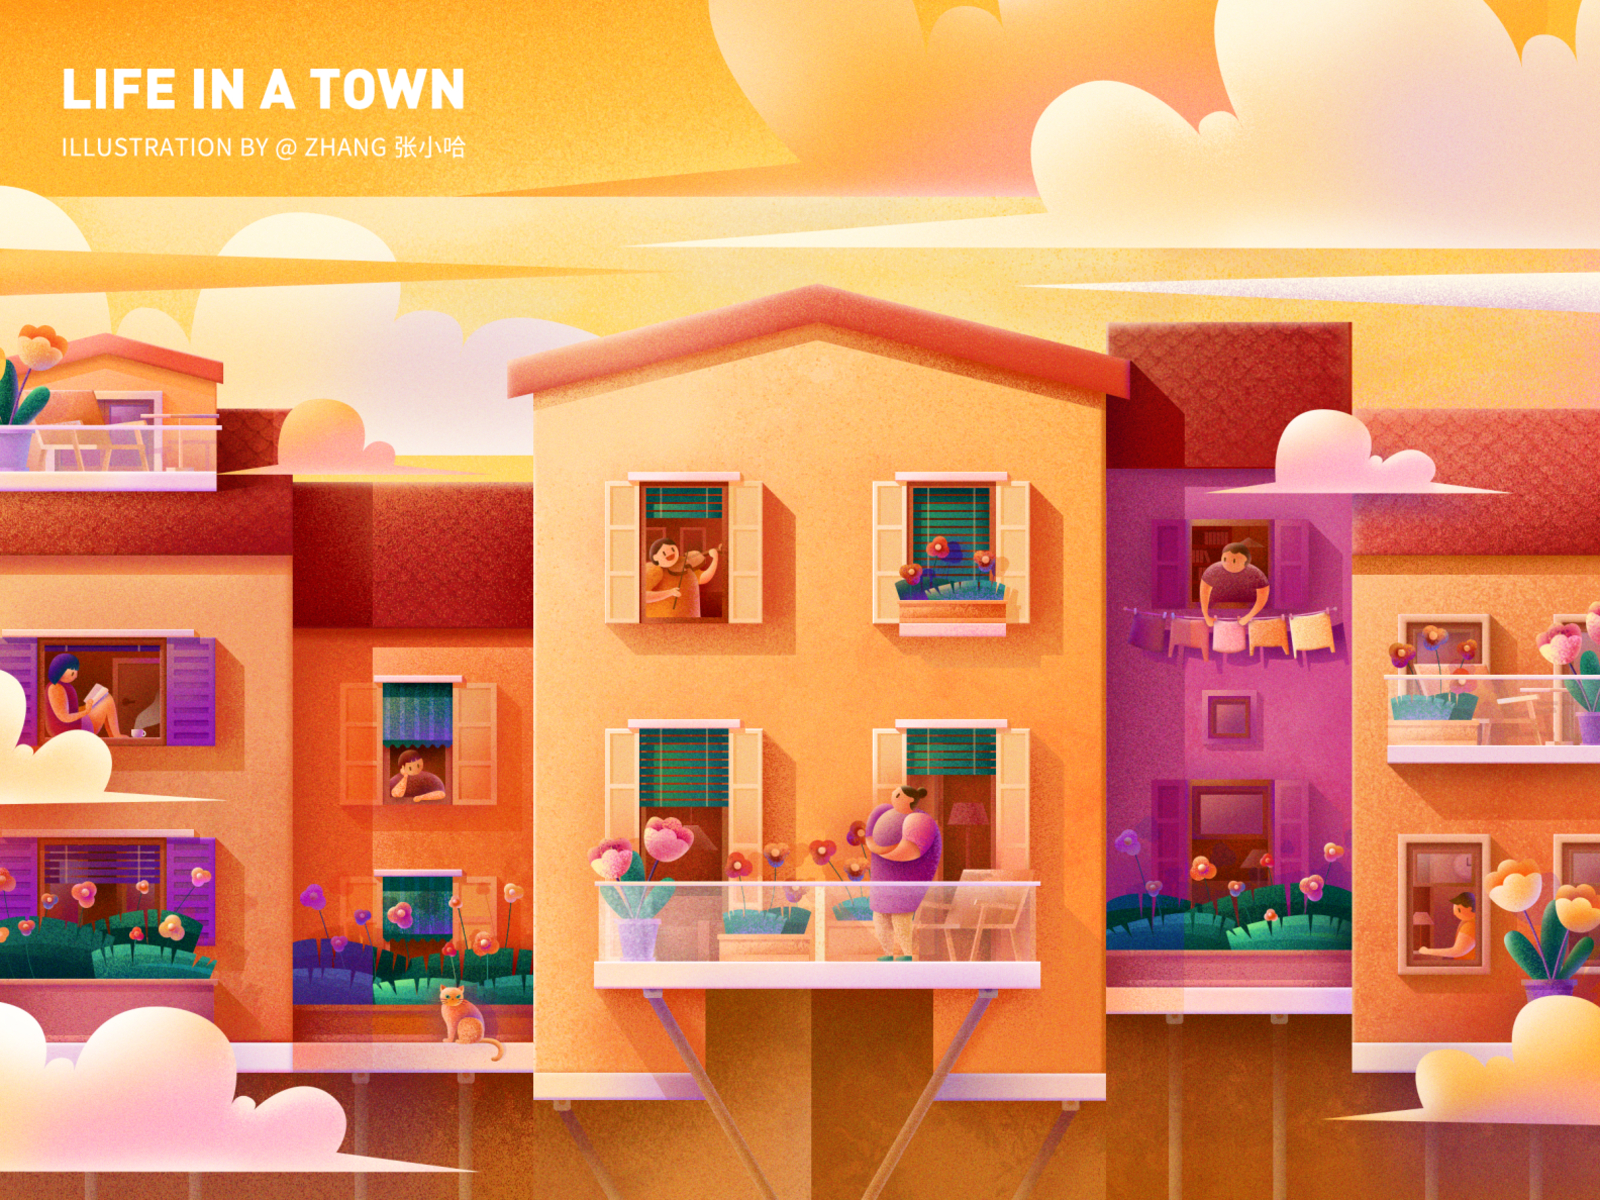 Life in a town - Melody ( PS ) architecture design balcony cat cloud flower illustration italy music neighbor reading roof spring sunset town violin violinist window yellow zhang 张小哈